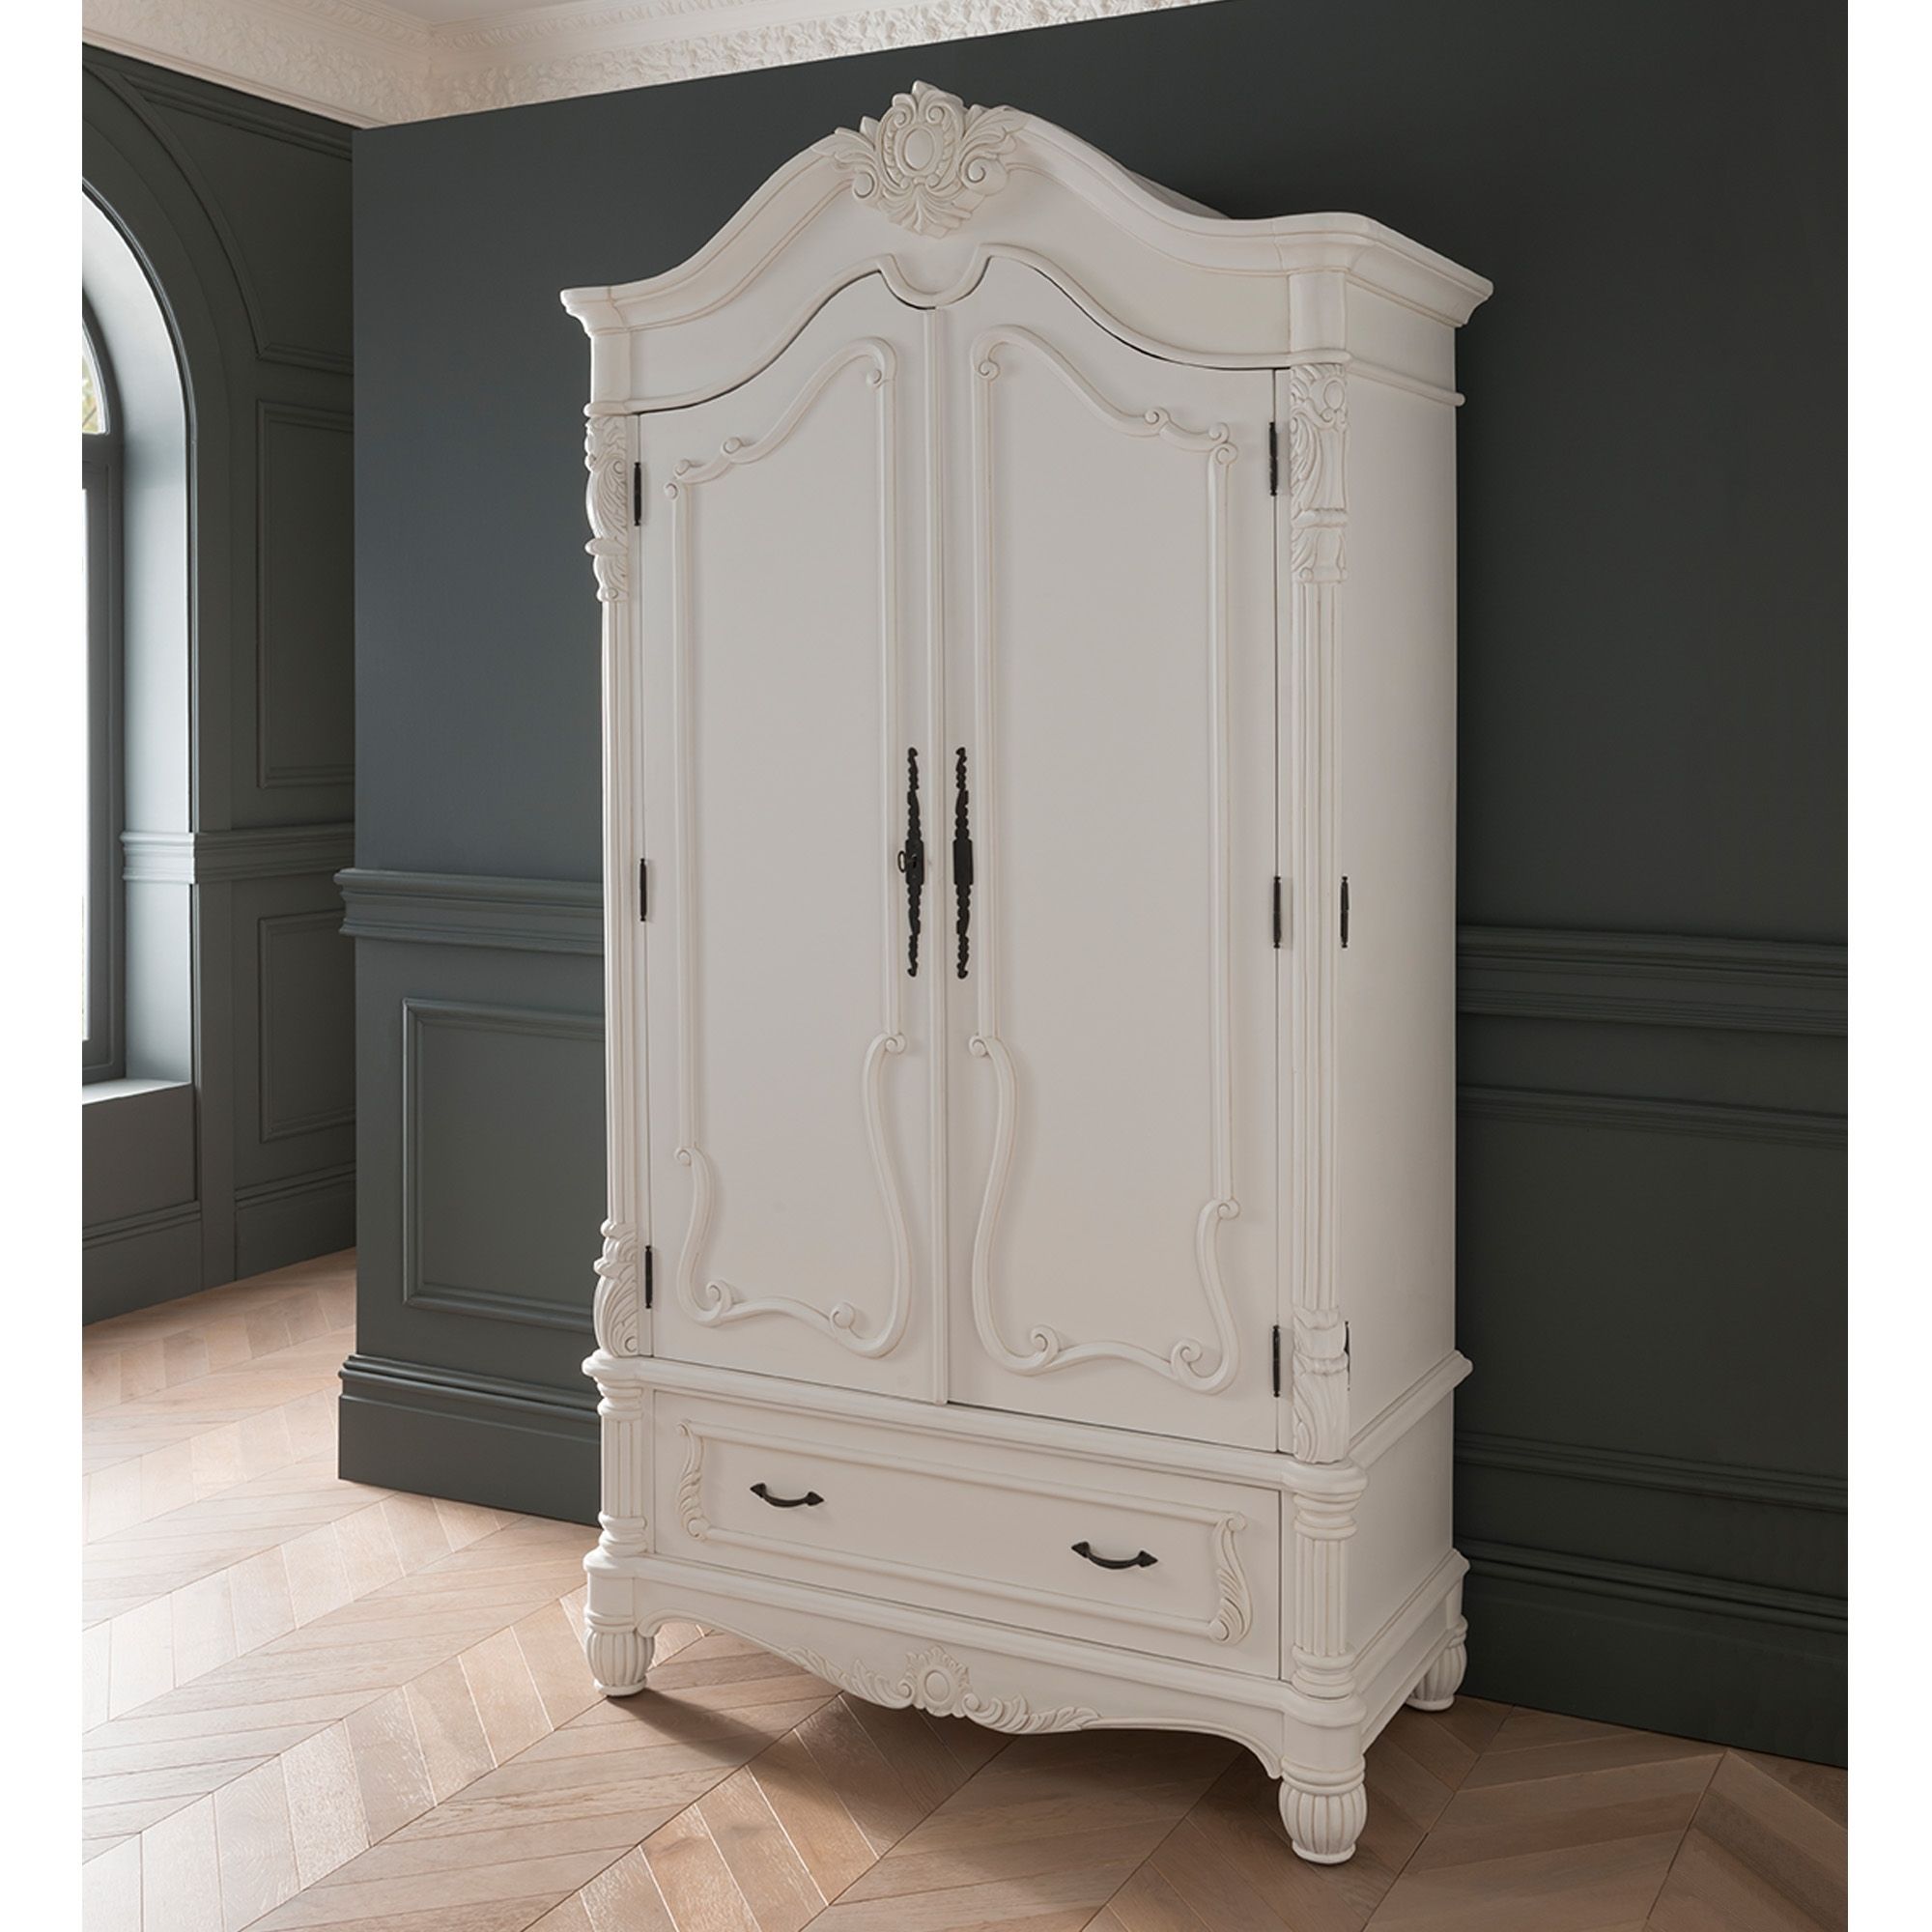 Antique French Style White Finished 1 Drawer Wardrobe | Homesdirect365 For White French Wardrobes (View 2 of 15)